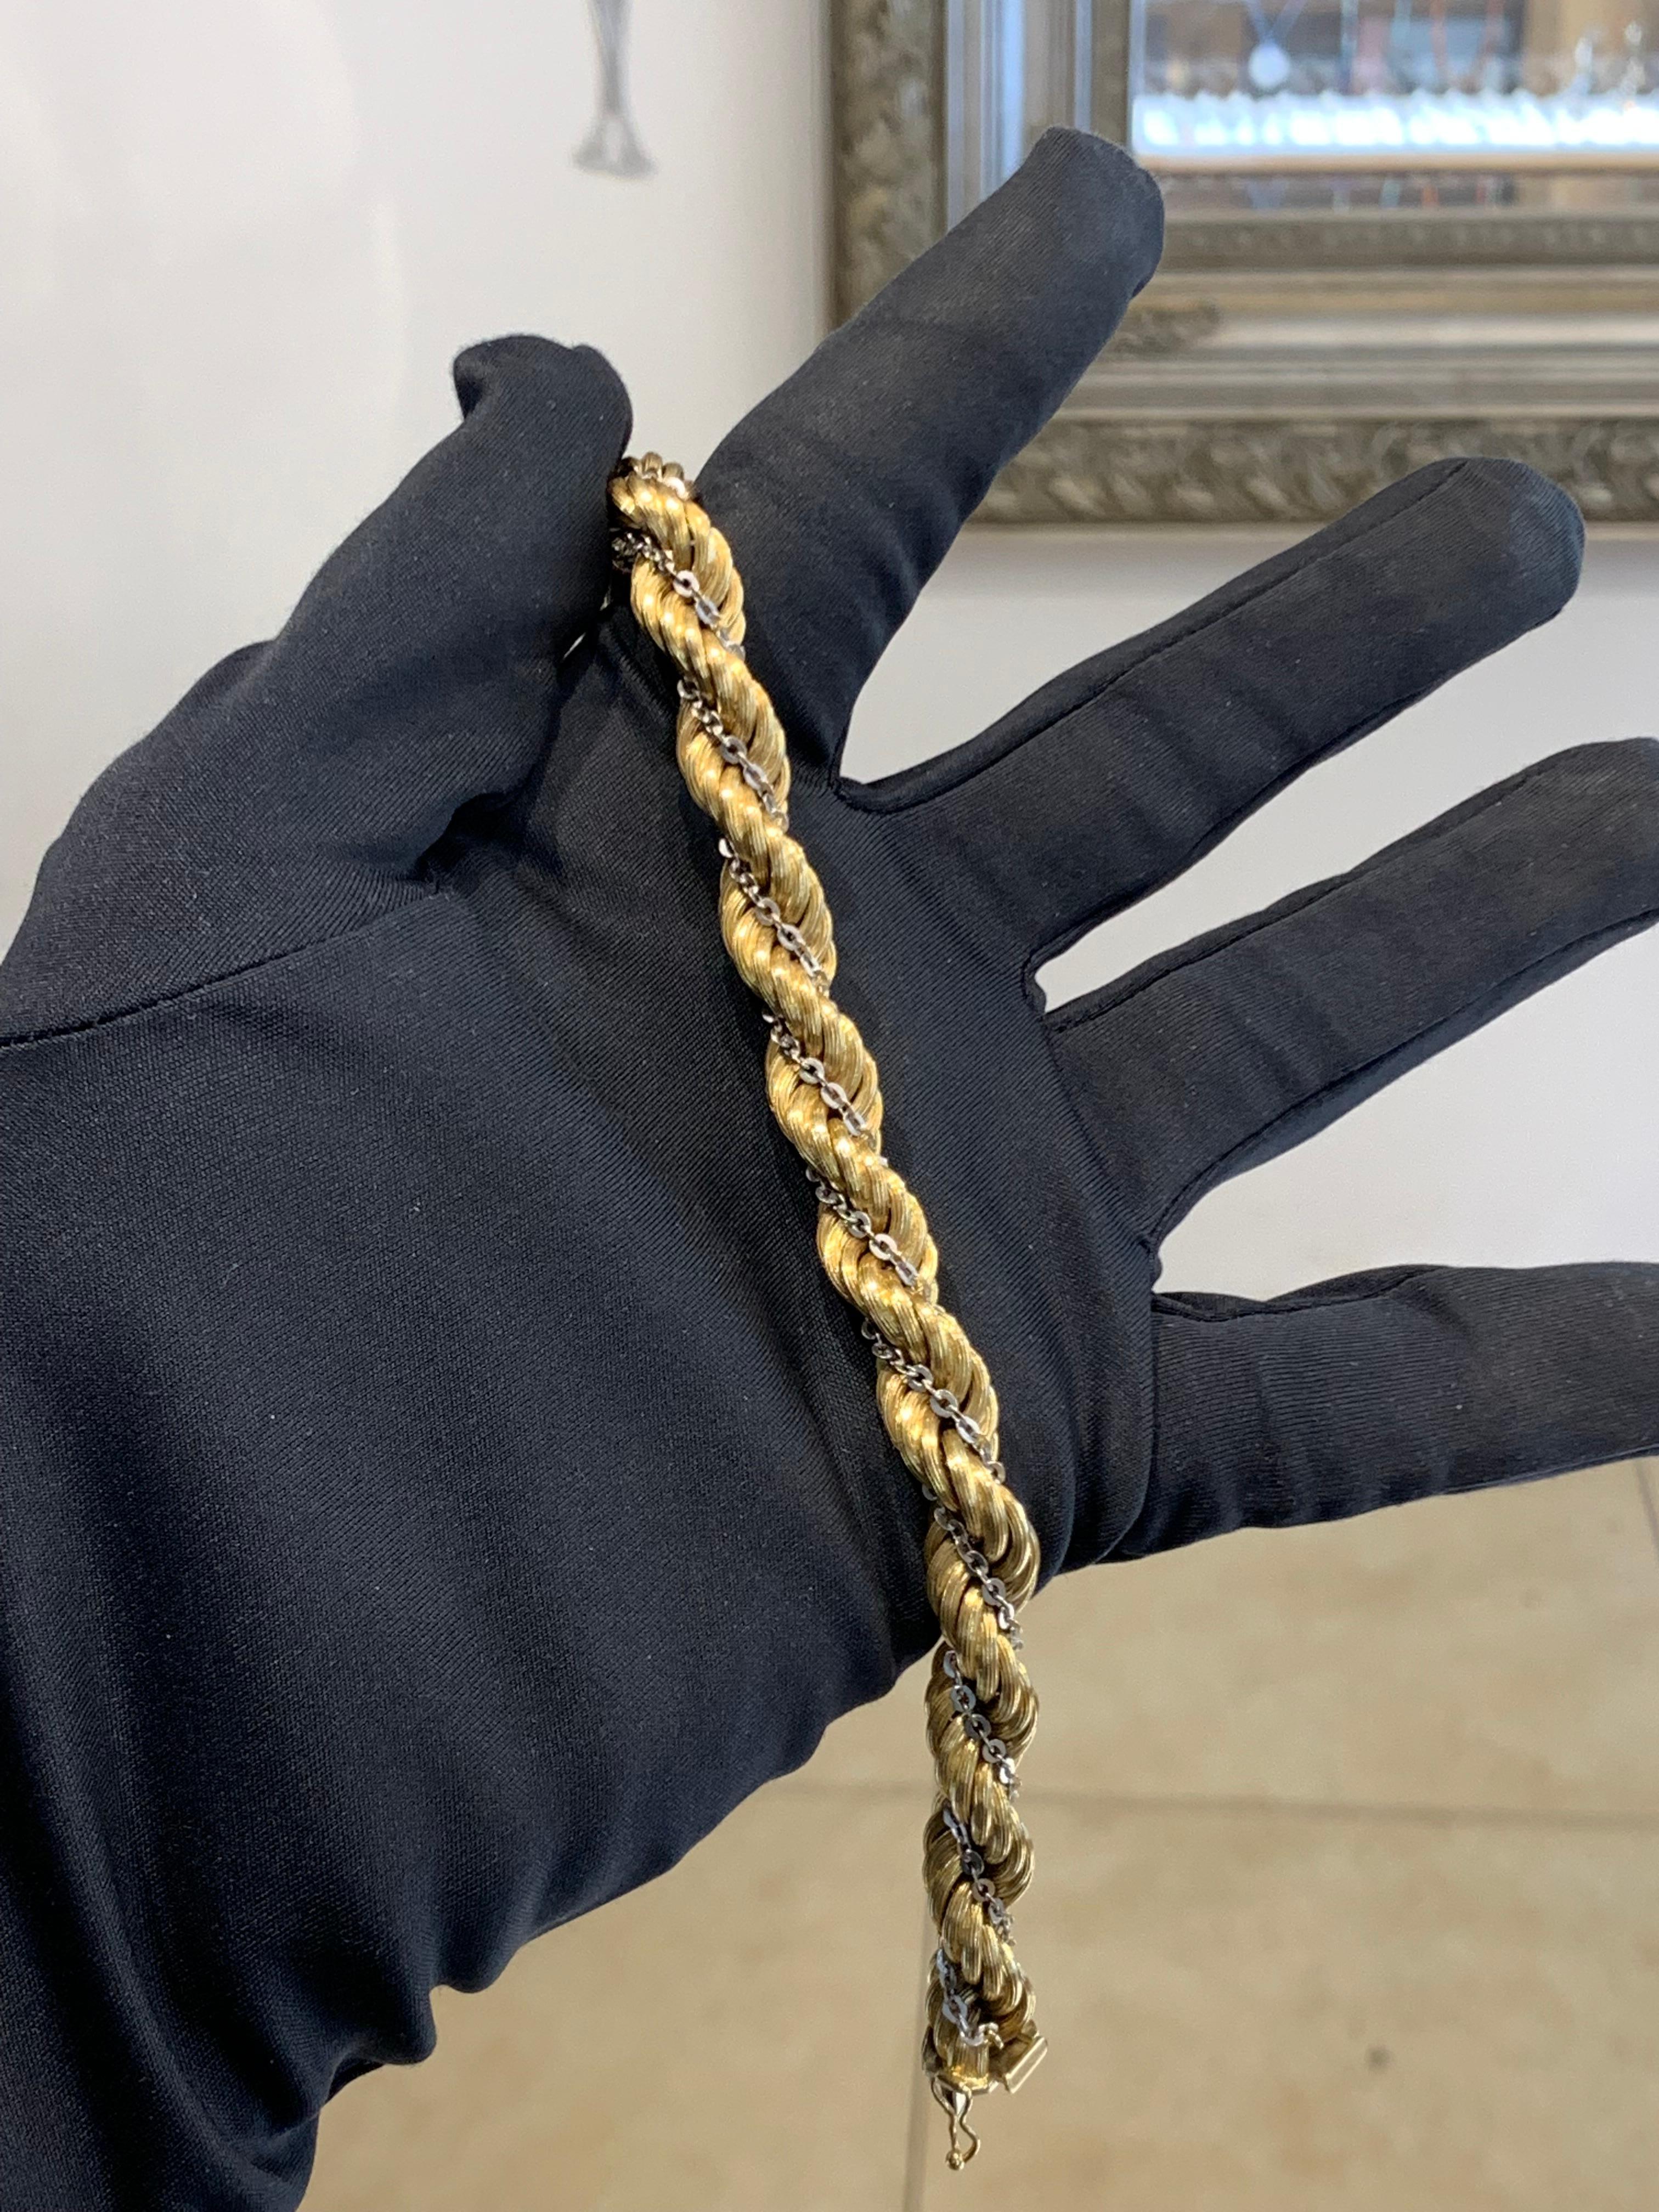 Beautifully Hand Crafted 18k Yellow & White Gold Italian Made Rope Bracelet.
Amazing Shine, Incredible Craftsmanship.
Great Statement Piece.
Comfortable Fit On The Wrist.
Very Popular.
